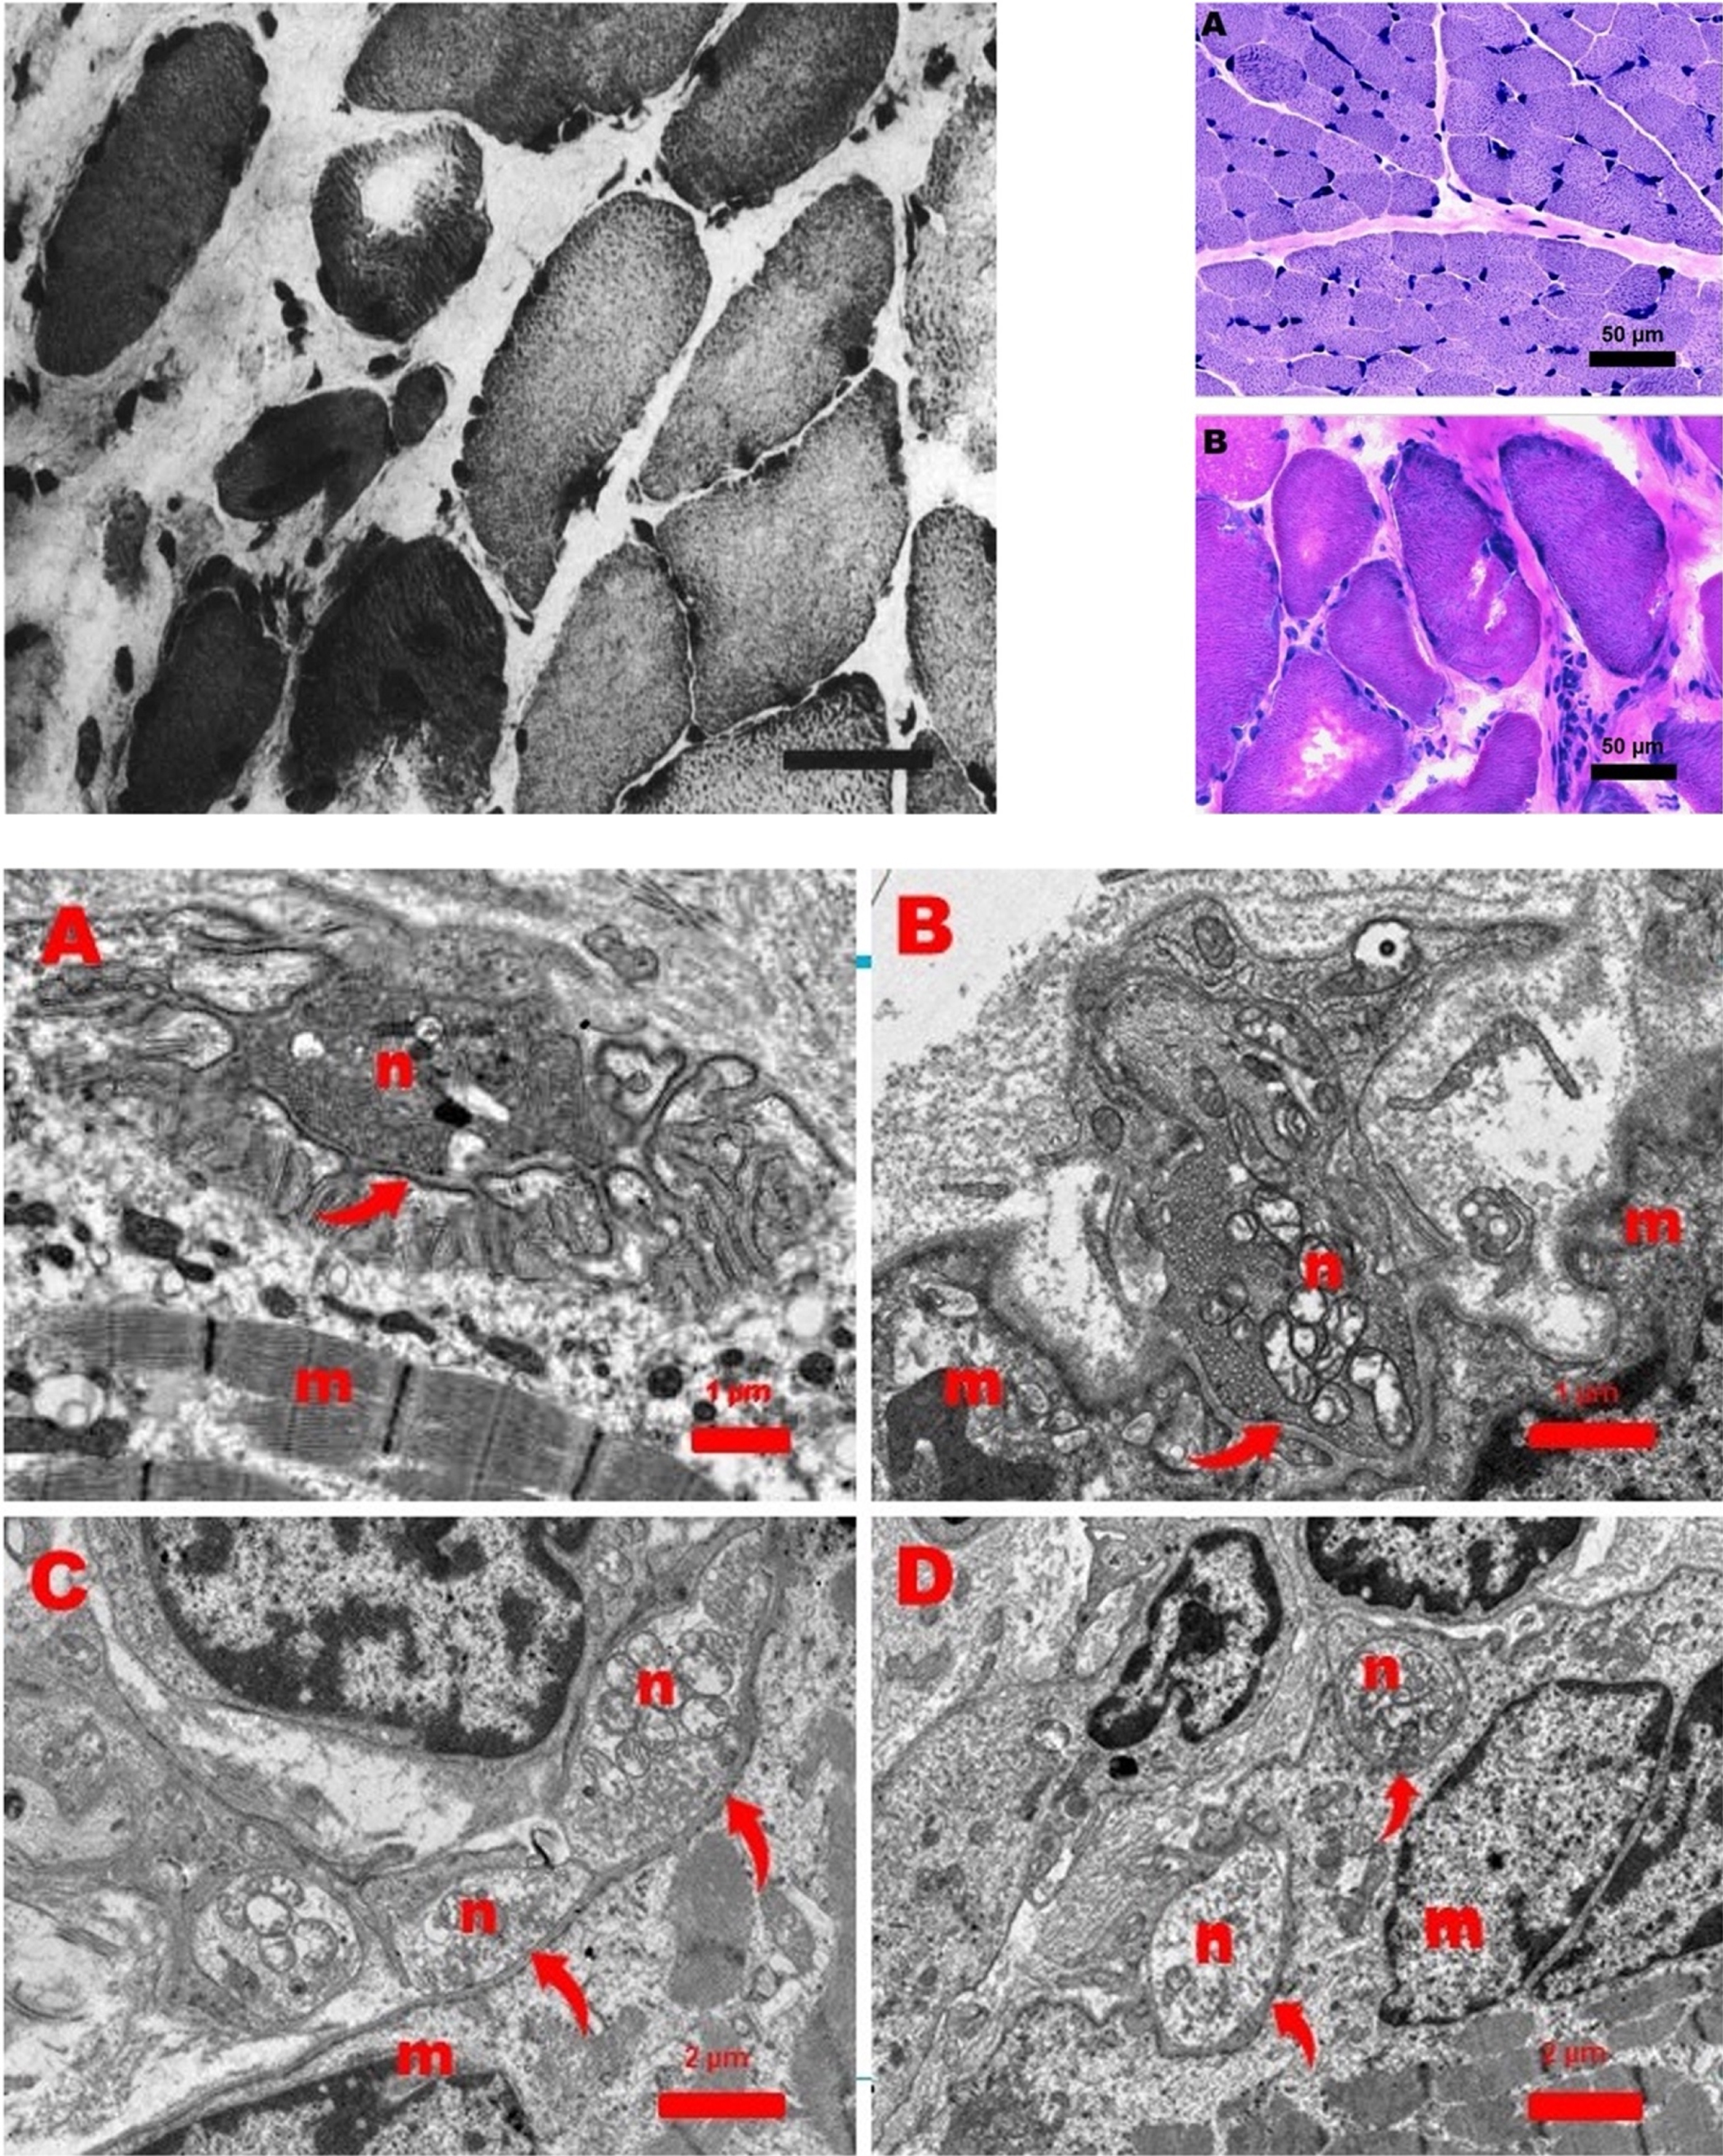 Top left: Original image of muscle biopsy of the diaphragm showing a dystrophic aspect with many hypertrophic muscle fibers in a matrix of connective tissue, as published in the report by Leijten et al. Top right: Muscle biopsy from the quadriceps muscle (A) and diaphragm muscle (B). Quadriceps muscle is normal. However, the diaphragm shows a dystrophic picture with hypertrophic fibers and increase of endomysial connective tissue. Bar: 50 micron. Hematoxilin-Phloxine (HP) stain. Bottom: Ultrastructure of a normal neuromuscular junction (NMJ) from a 11-month-old girl (Figure A). Figures B, C, and D show abnormal NJMs in the diaphragm of the patient in this report. Arrows point to the primary cleft between the neuronal (n) and muscular (m) part of the NMJs (Figure A, B, C, and D). The neuronal part (n) of the NMJs contains mitochondria and small vesicles with acetylcholine. Note the presence of many secondary clefts invaginating the muscular part (Figure A) and the almost complete absence of these invaginations in the abnormal NMJs.